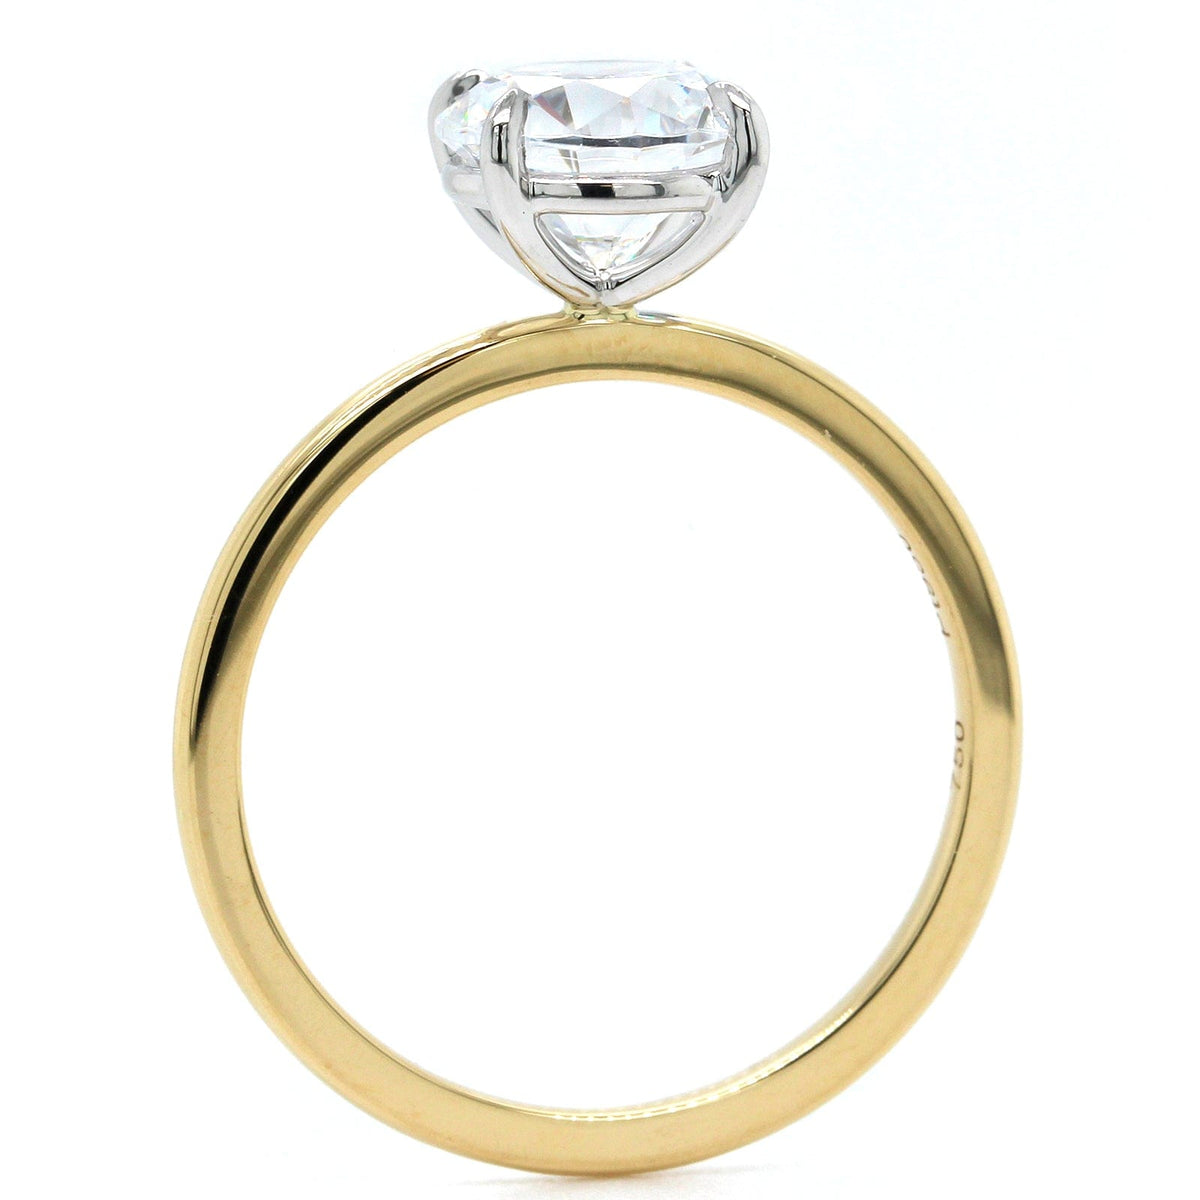 18K Yellow Gold Round 4 Prong Solitaire Engagement Ring Setting, 18k yellow gold and platinum, Long's Jewelers